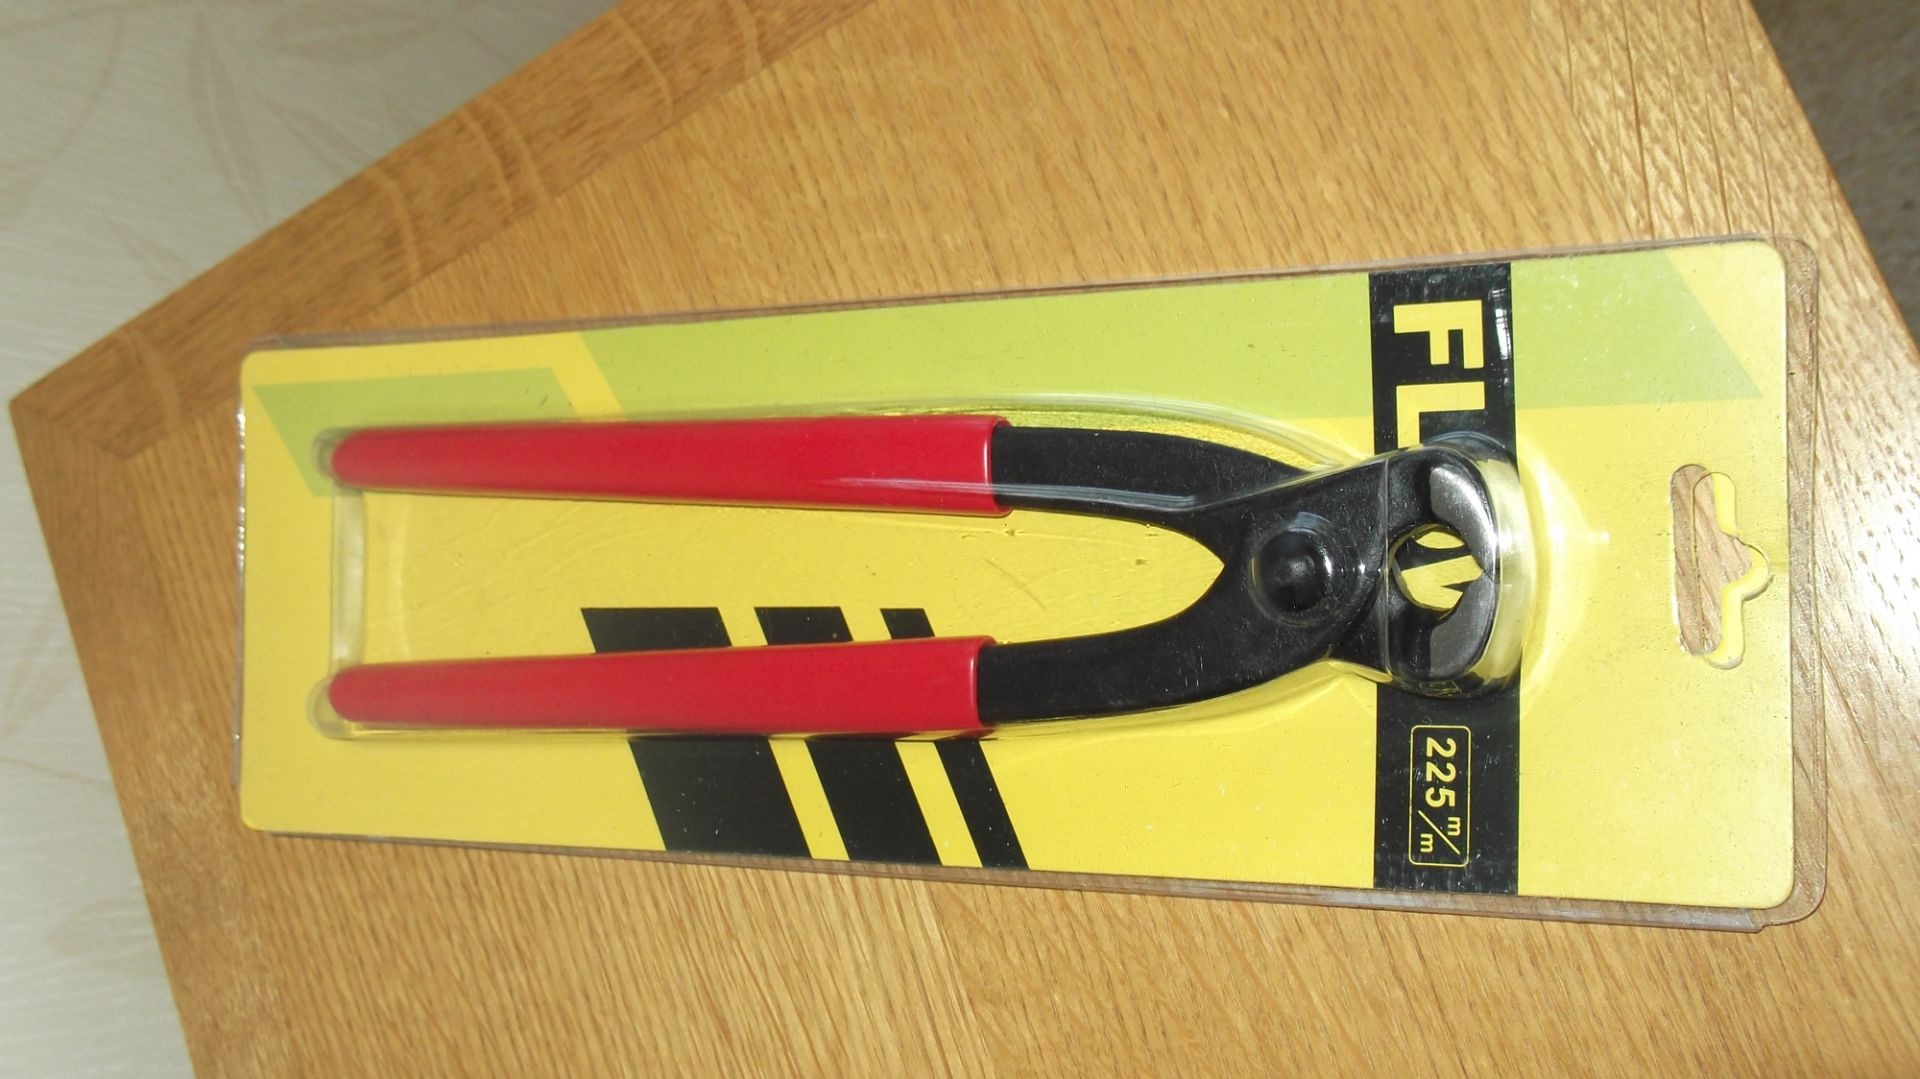 2 Bx Of 5 End Cutting Pliers 225Mm Long - Image 2 of 3